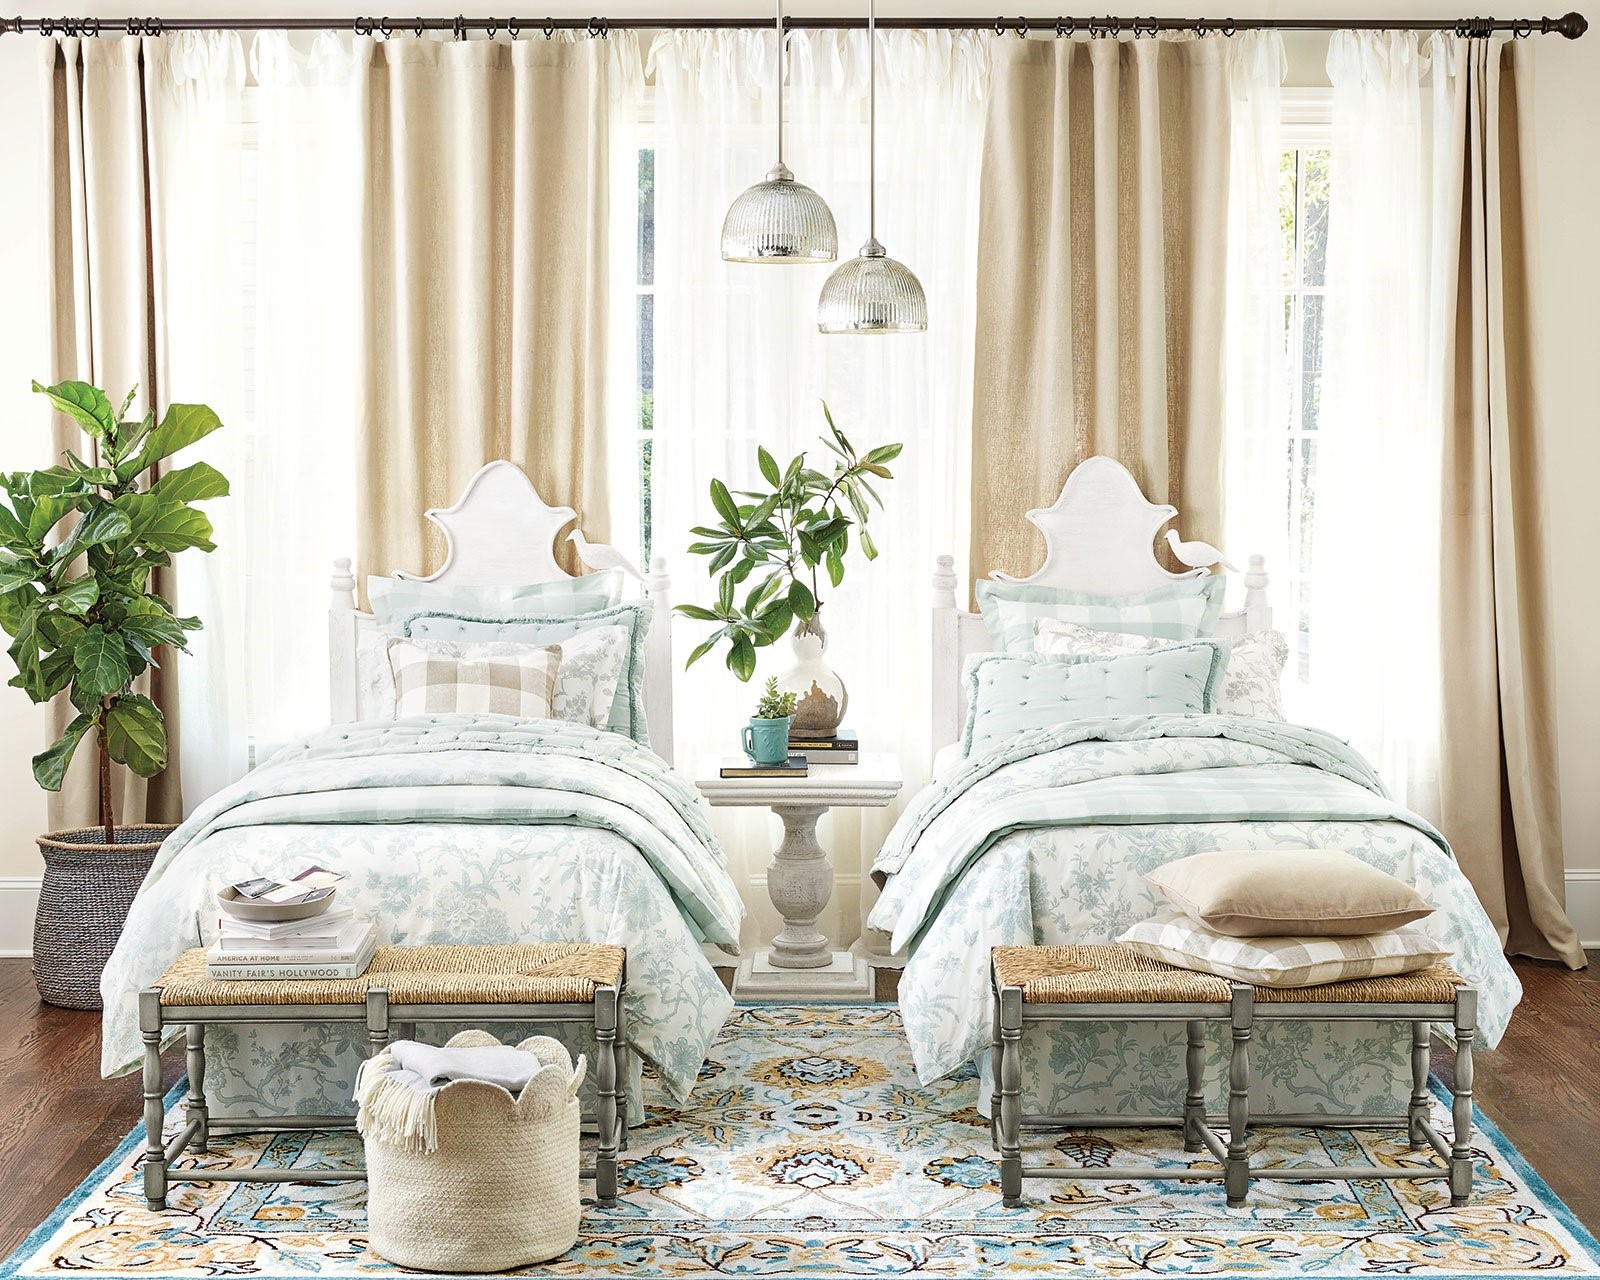 23 Amazing Ways to Style Your Bed in Front of Window